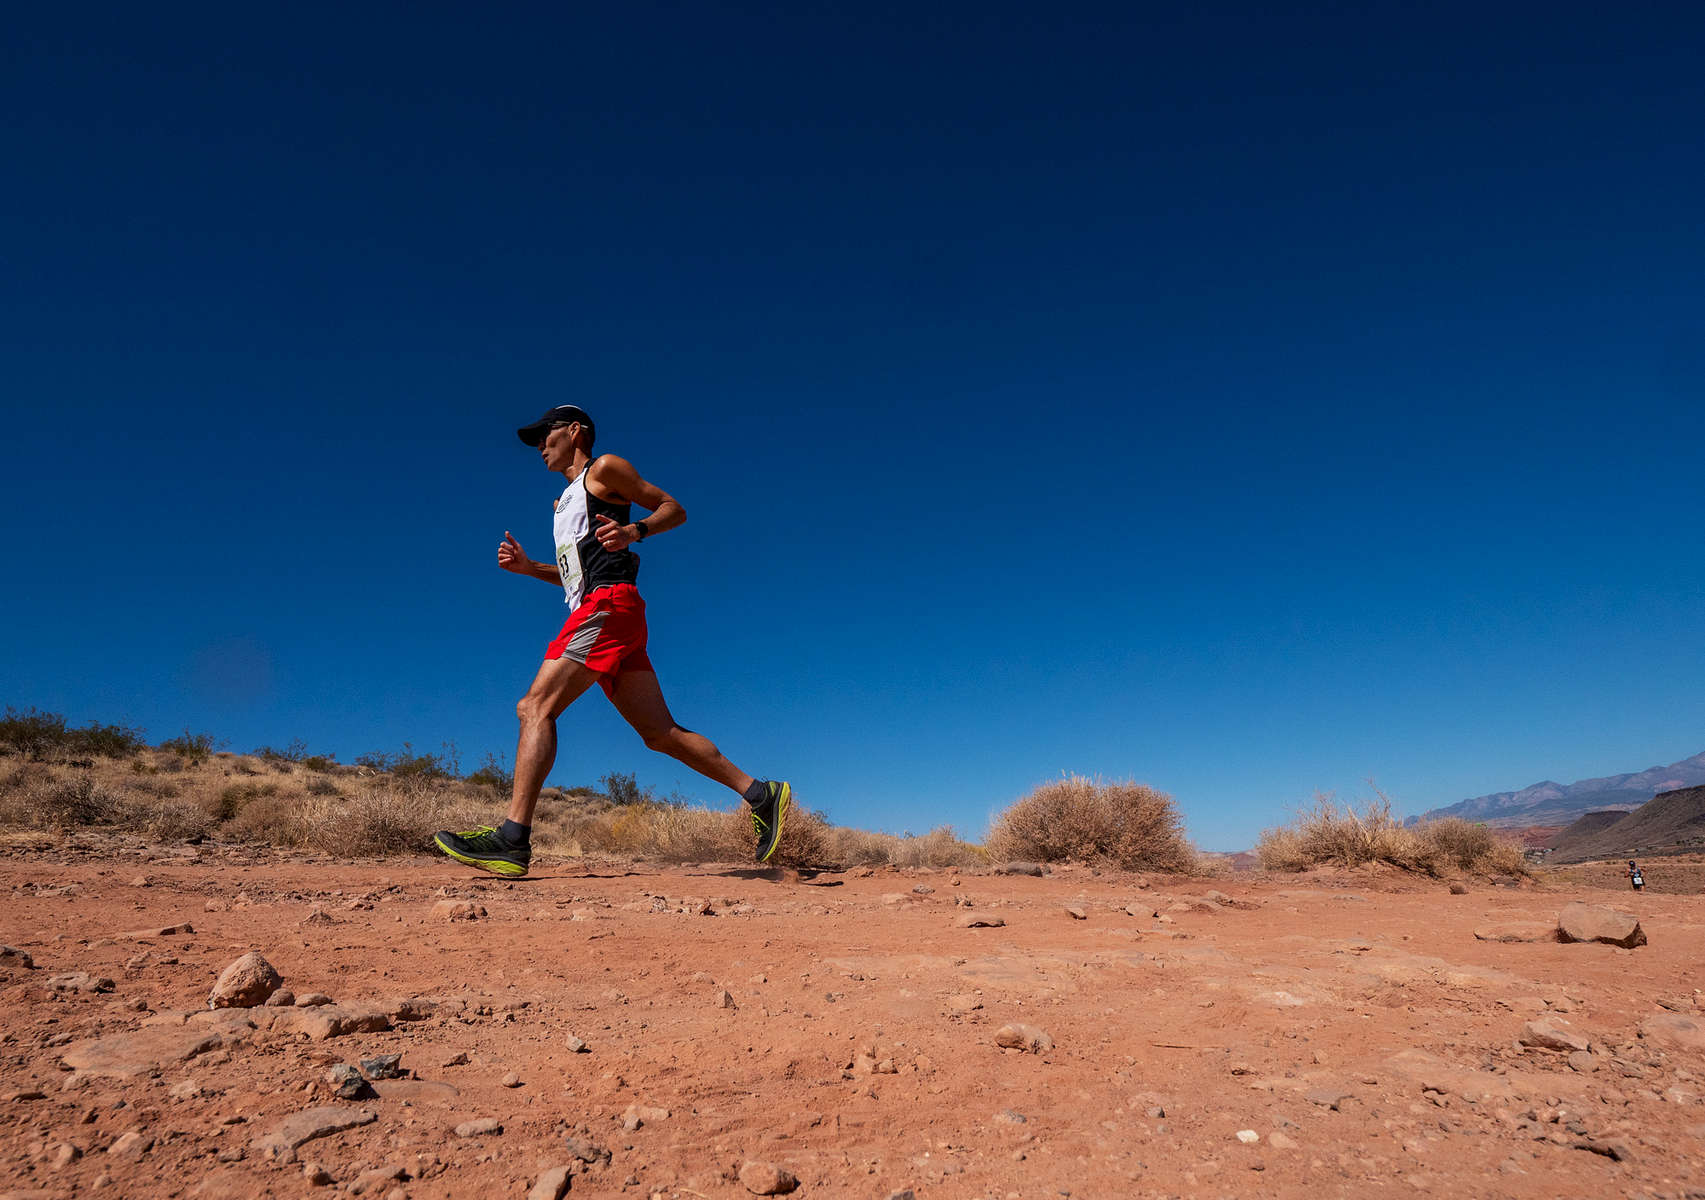 Senior athlete Russell Otani  competes in the Trail Race during the Huntsman World Senior Games on October 12, 2019 in St. George, Utah. 